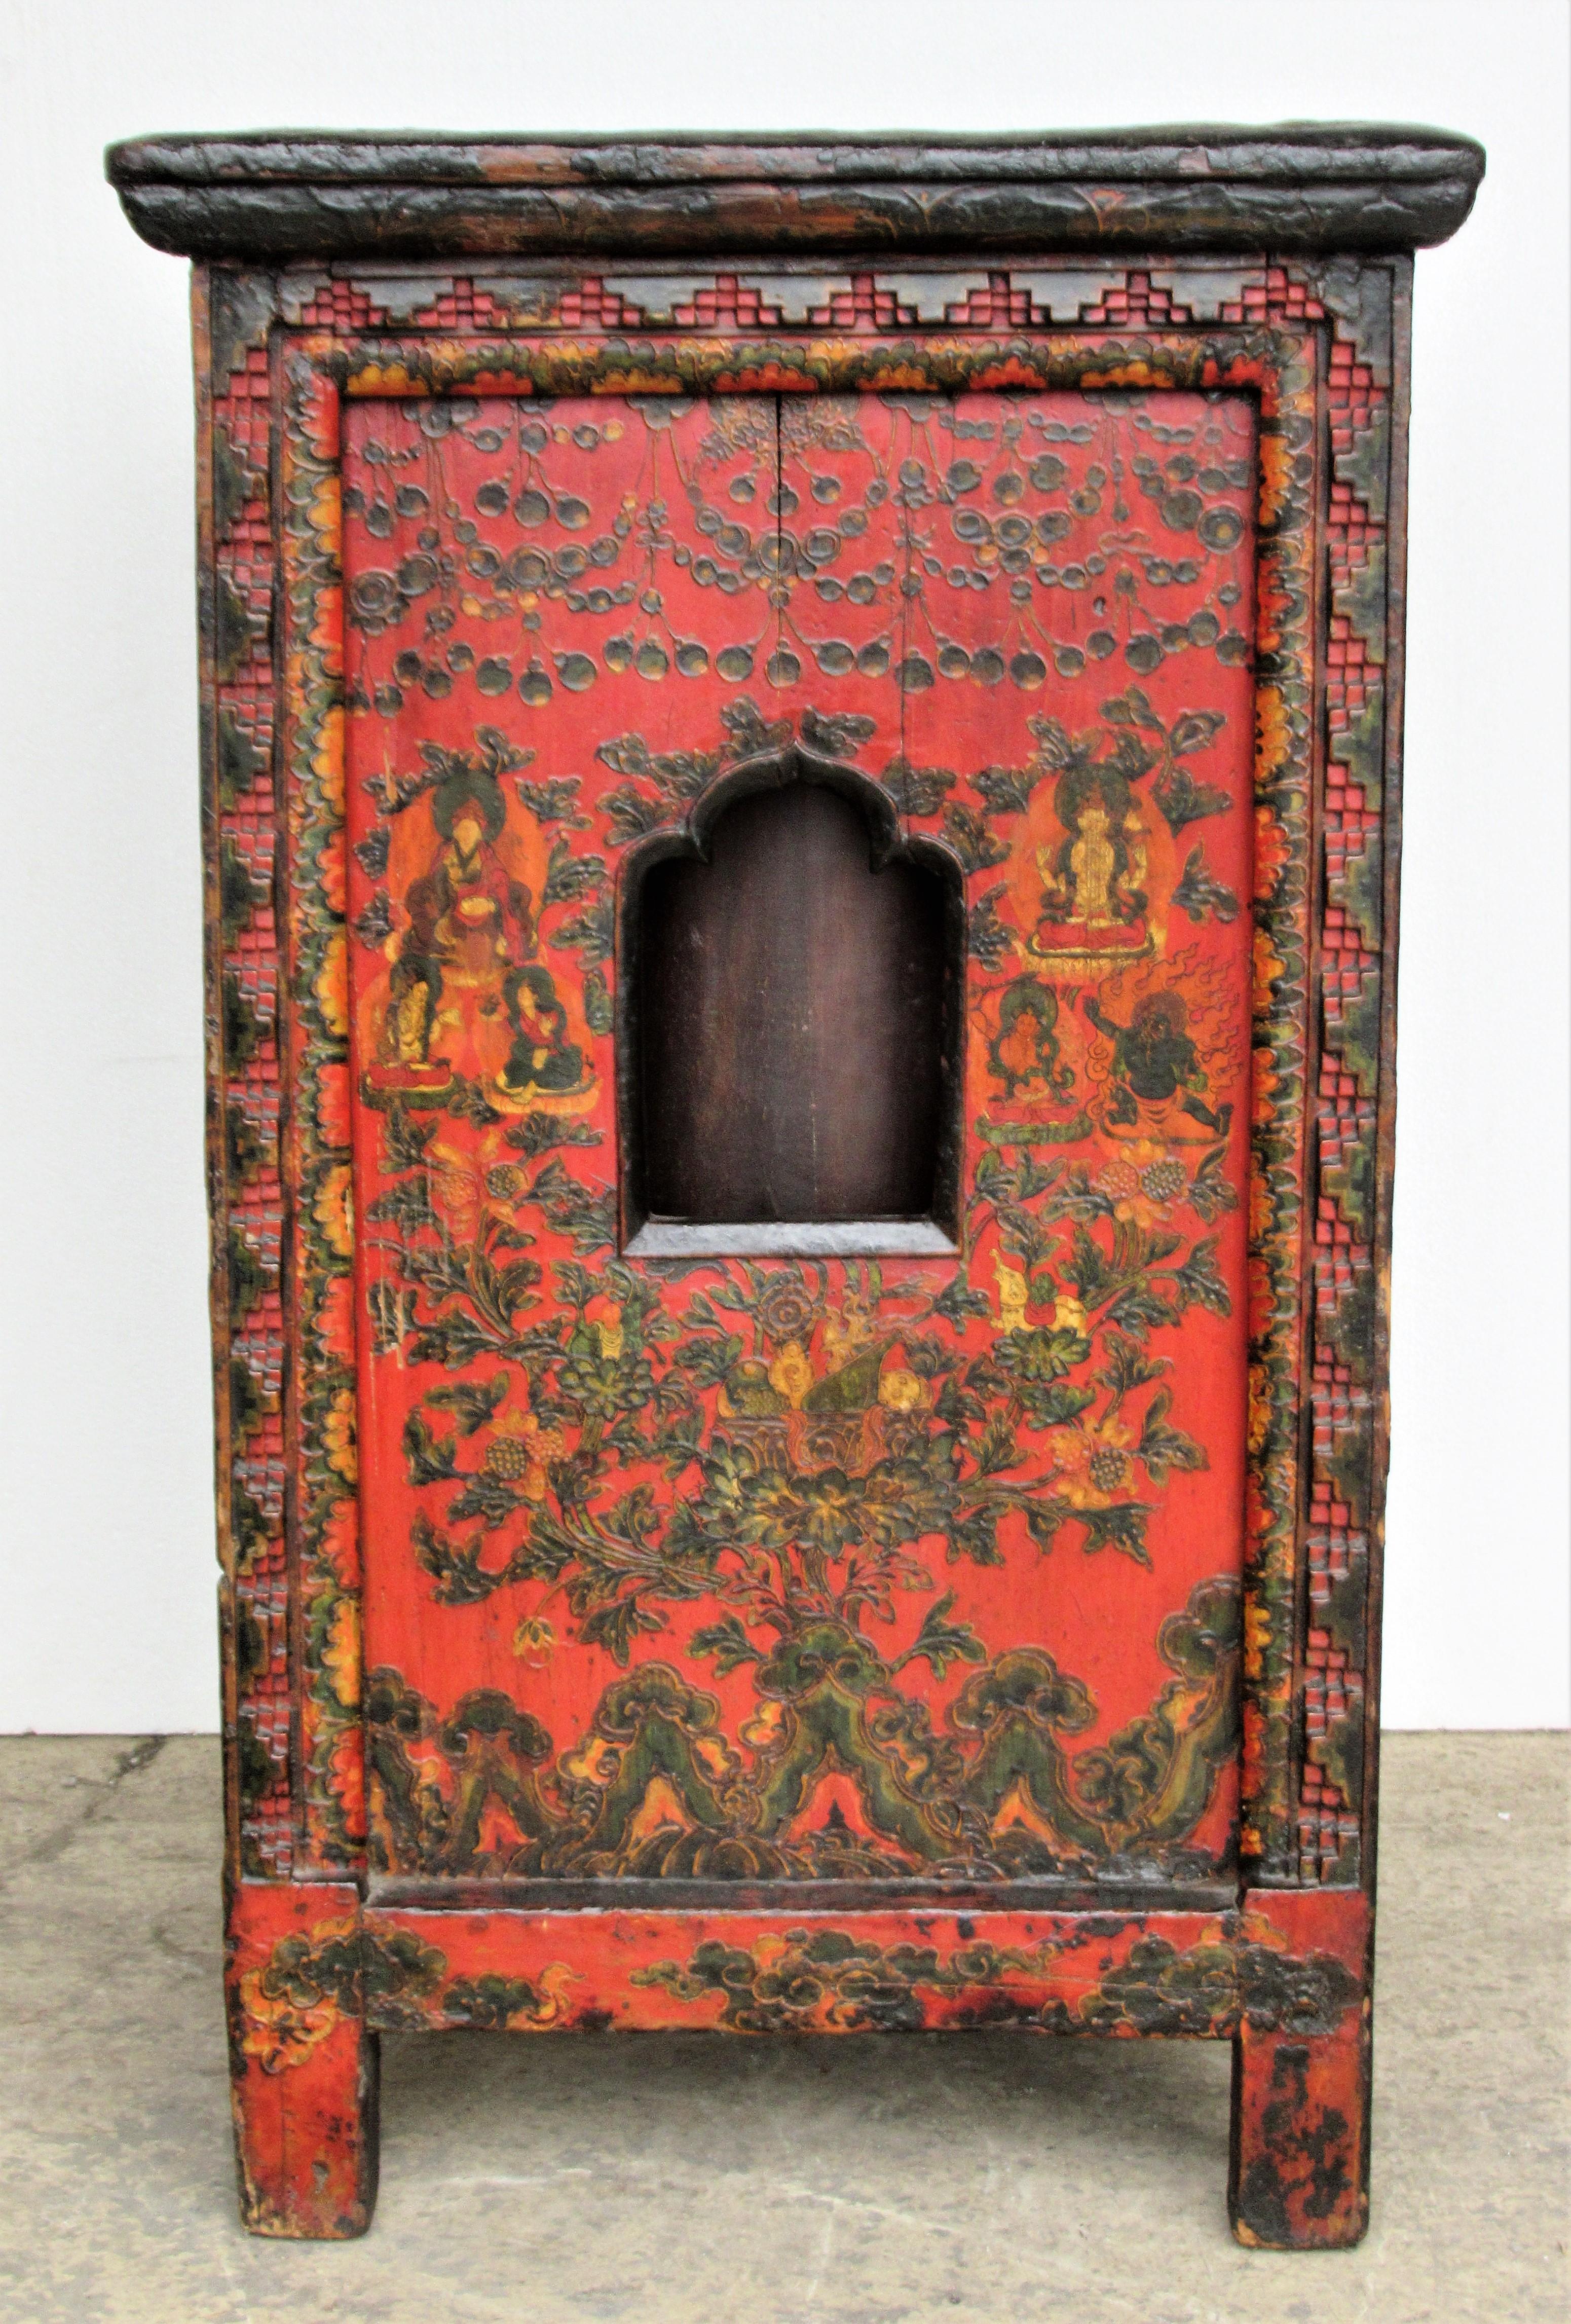 Antique Tibetan prayer wheel altar table with beautifully aged original rich jewel tone colors of fine polychrome painted decorations- Buddha, other figures, elephant, lanterns, floral, berries. All-over low and high relief carving at front / side